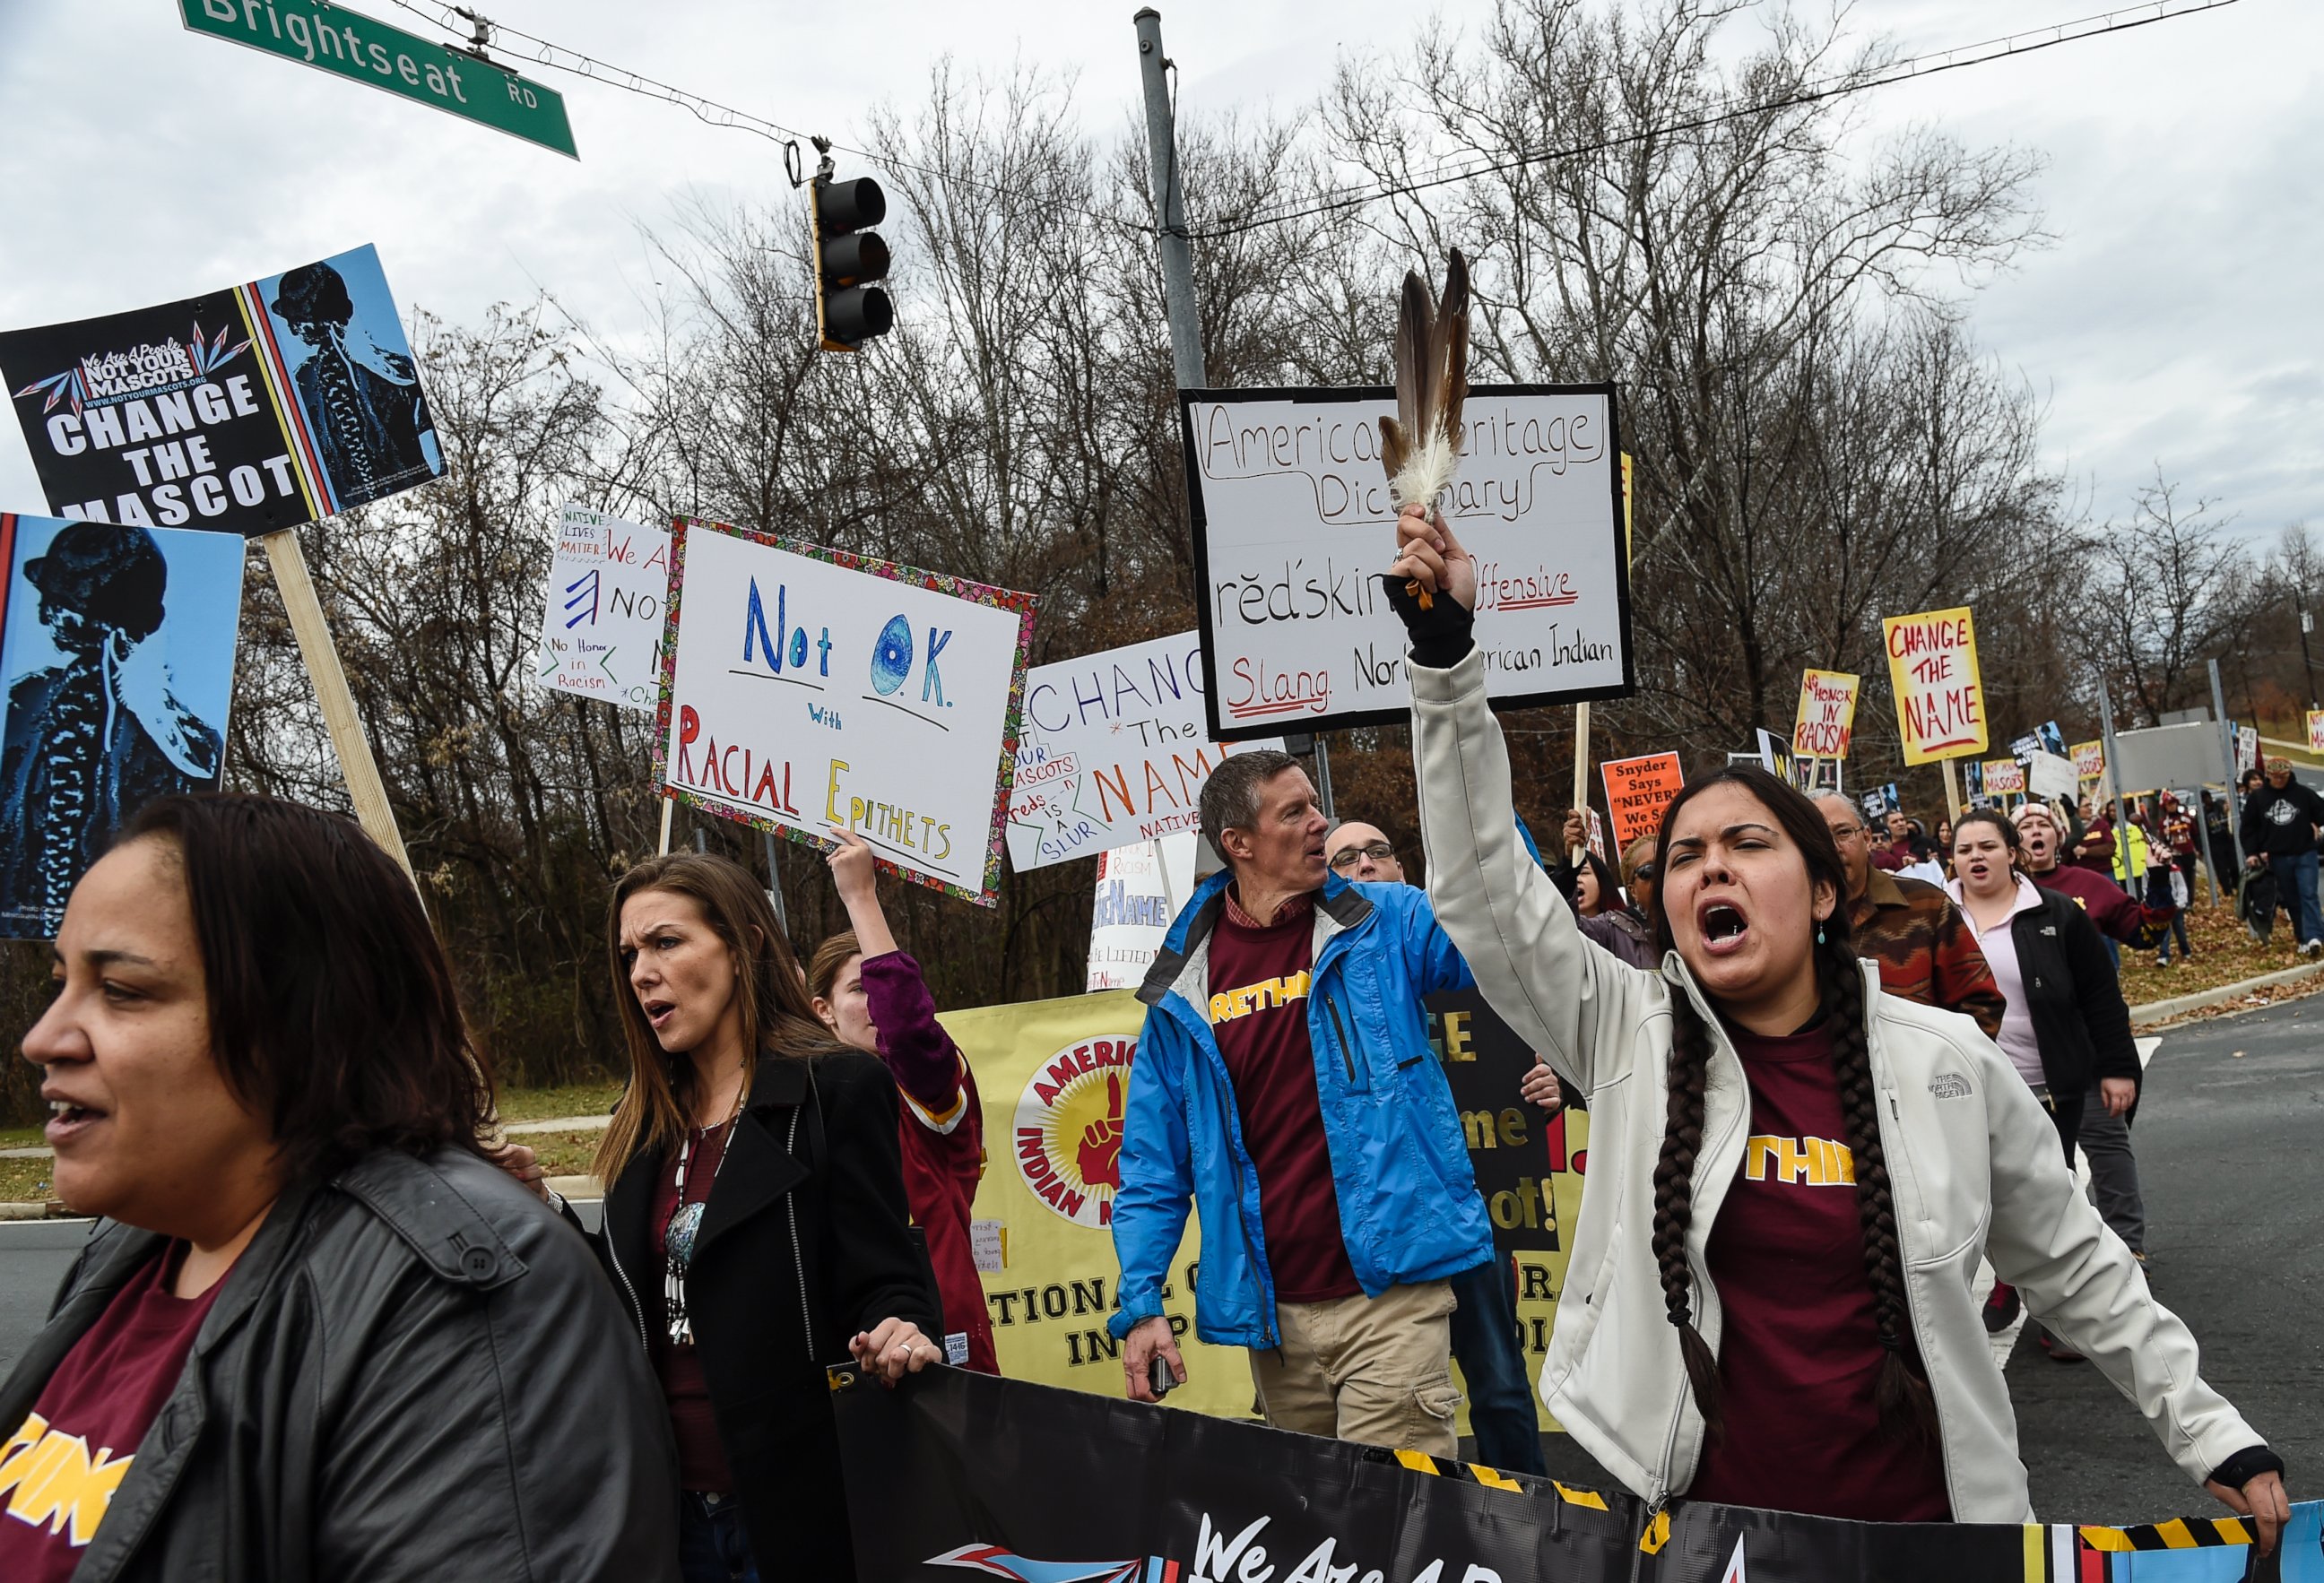 PHOTO: Tara Houska, right, joins other Native Americans and supporters to protest the name and logo of the Washington Football team before the game on Dec. 28, 2014.